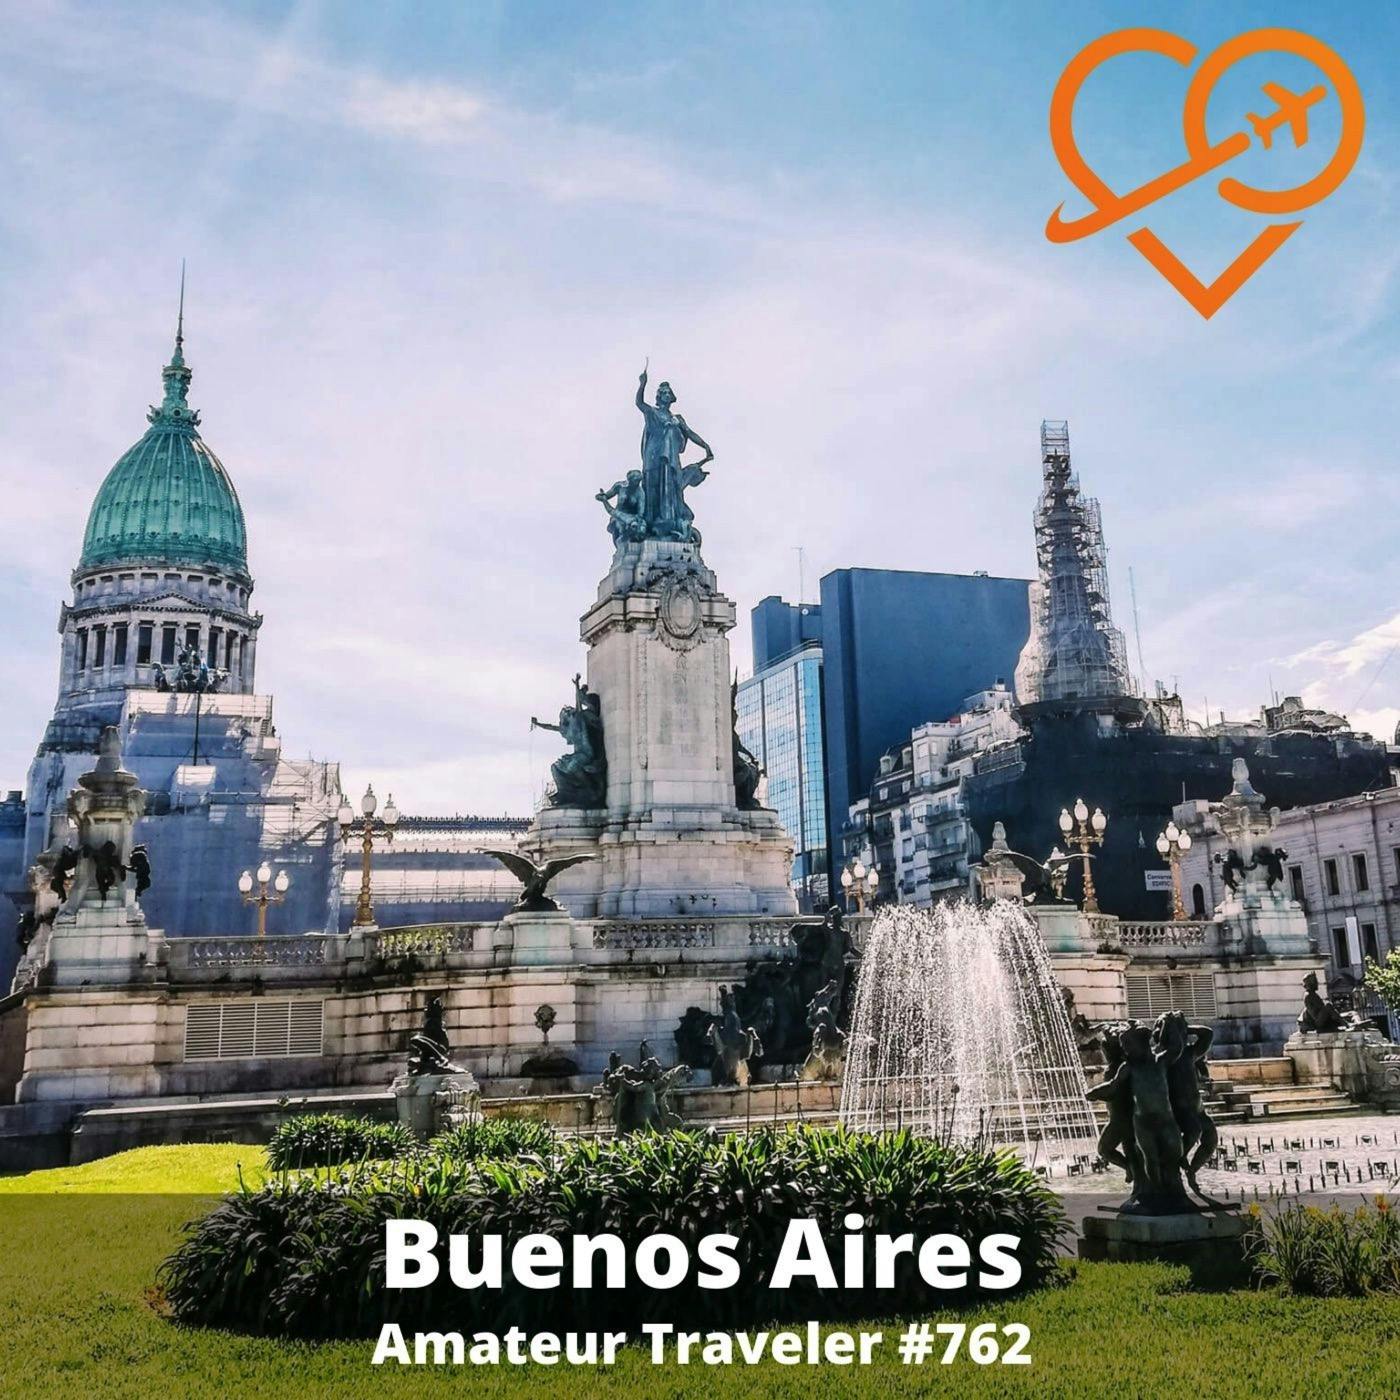 AT#762 - Travel to Buenos Aires, Argentina